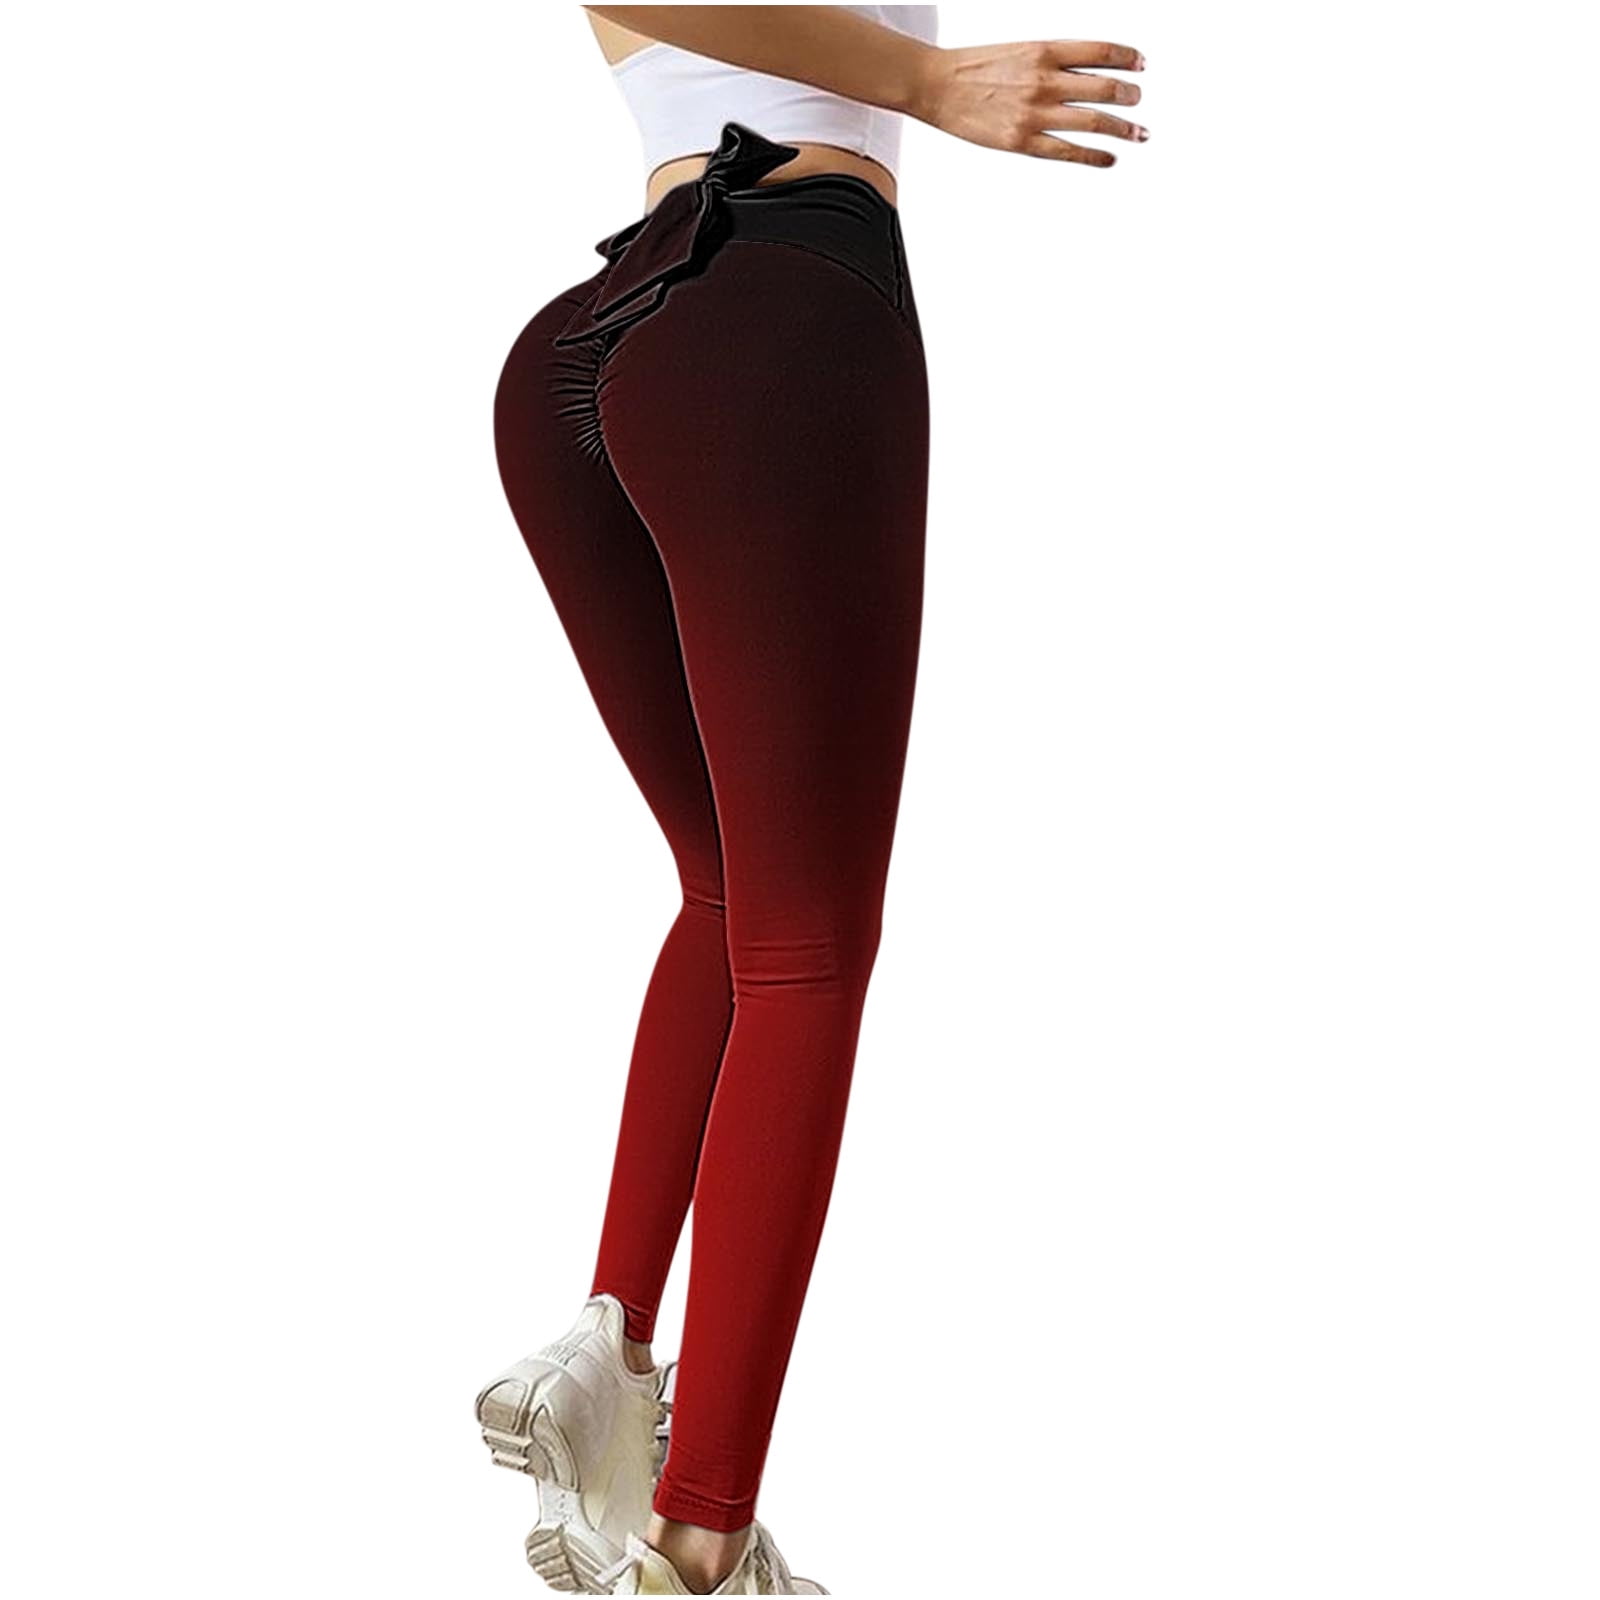 Black and Red Ombre Yoga Leggings, Gradient Women Girls Workout